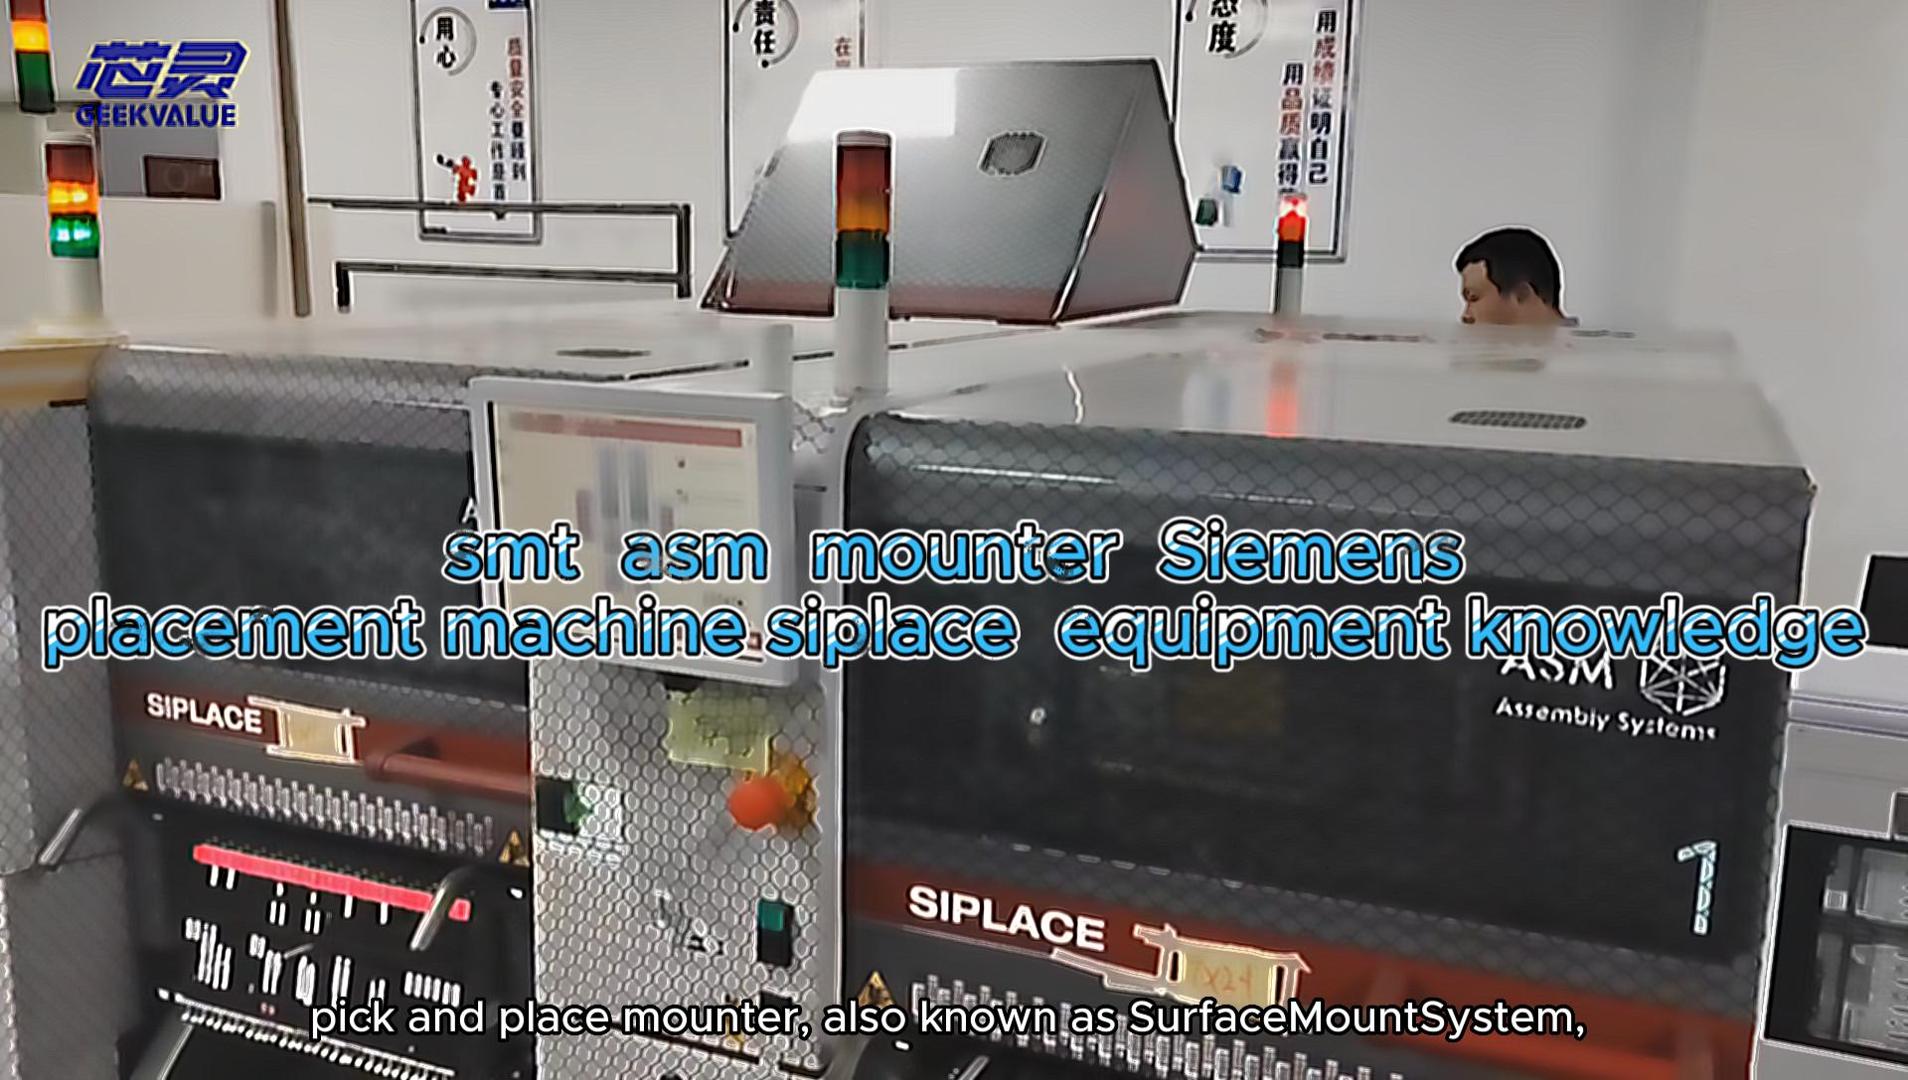 smt pick and place mounter knowledge siplace placement machine/siemens asm smt chip equiment